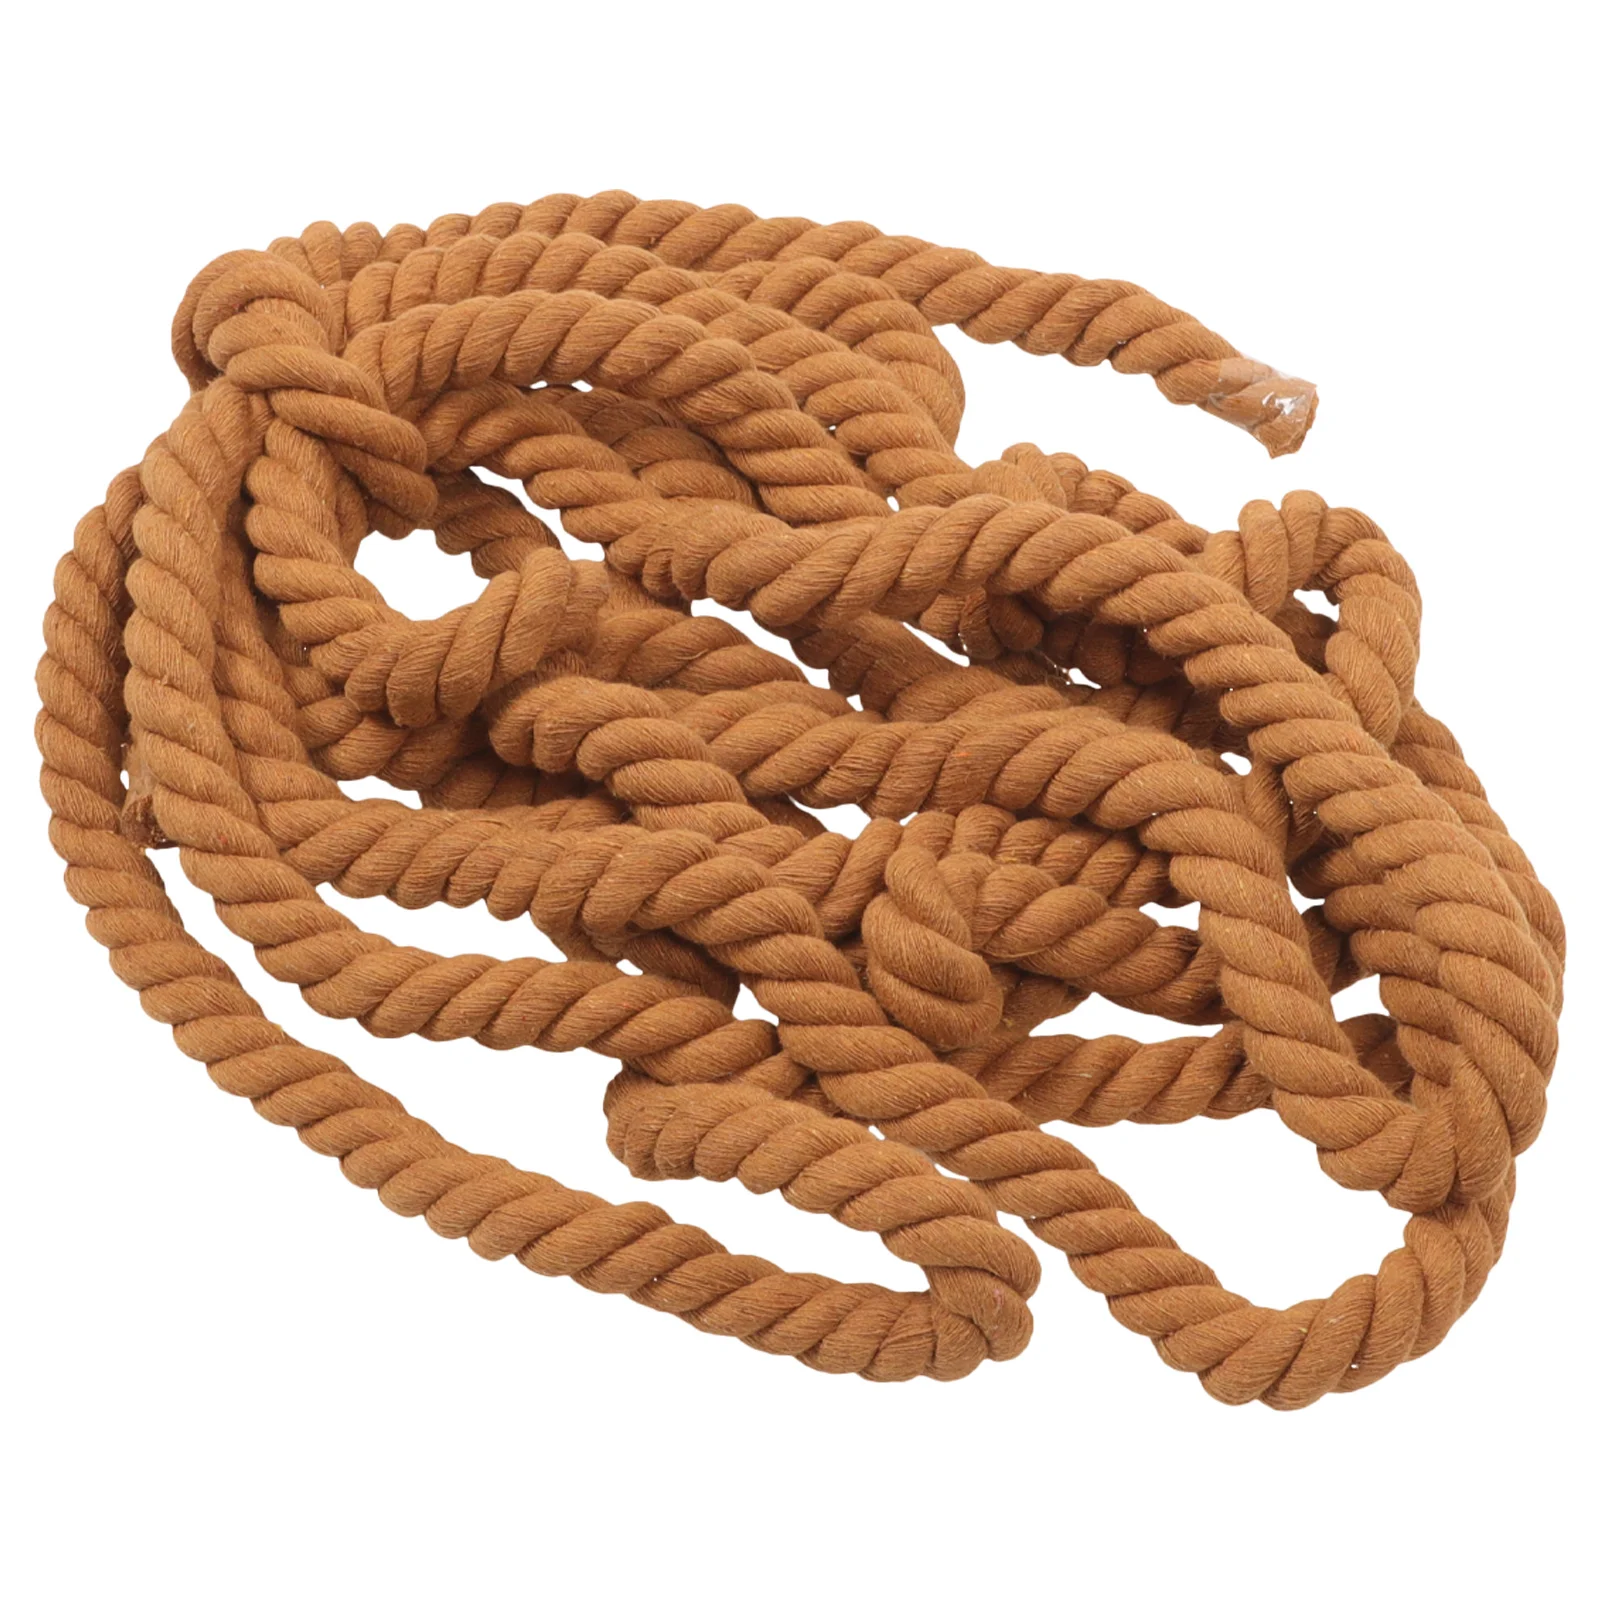 

Tug War Rope Decorative Craft Home Bathroom Decorations Giant Outdoor Games Party Accessory Funny Pulling Large